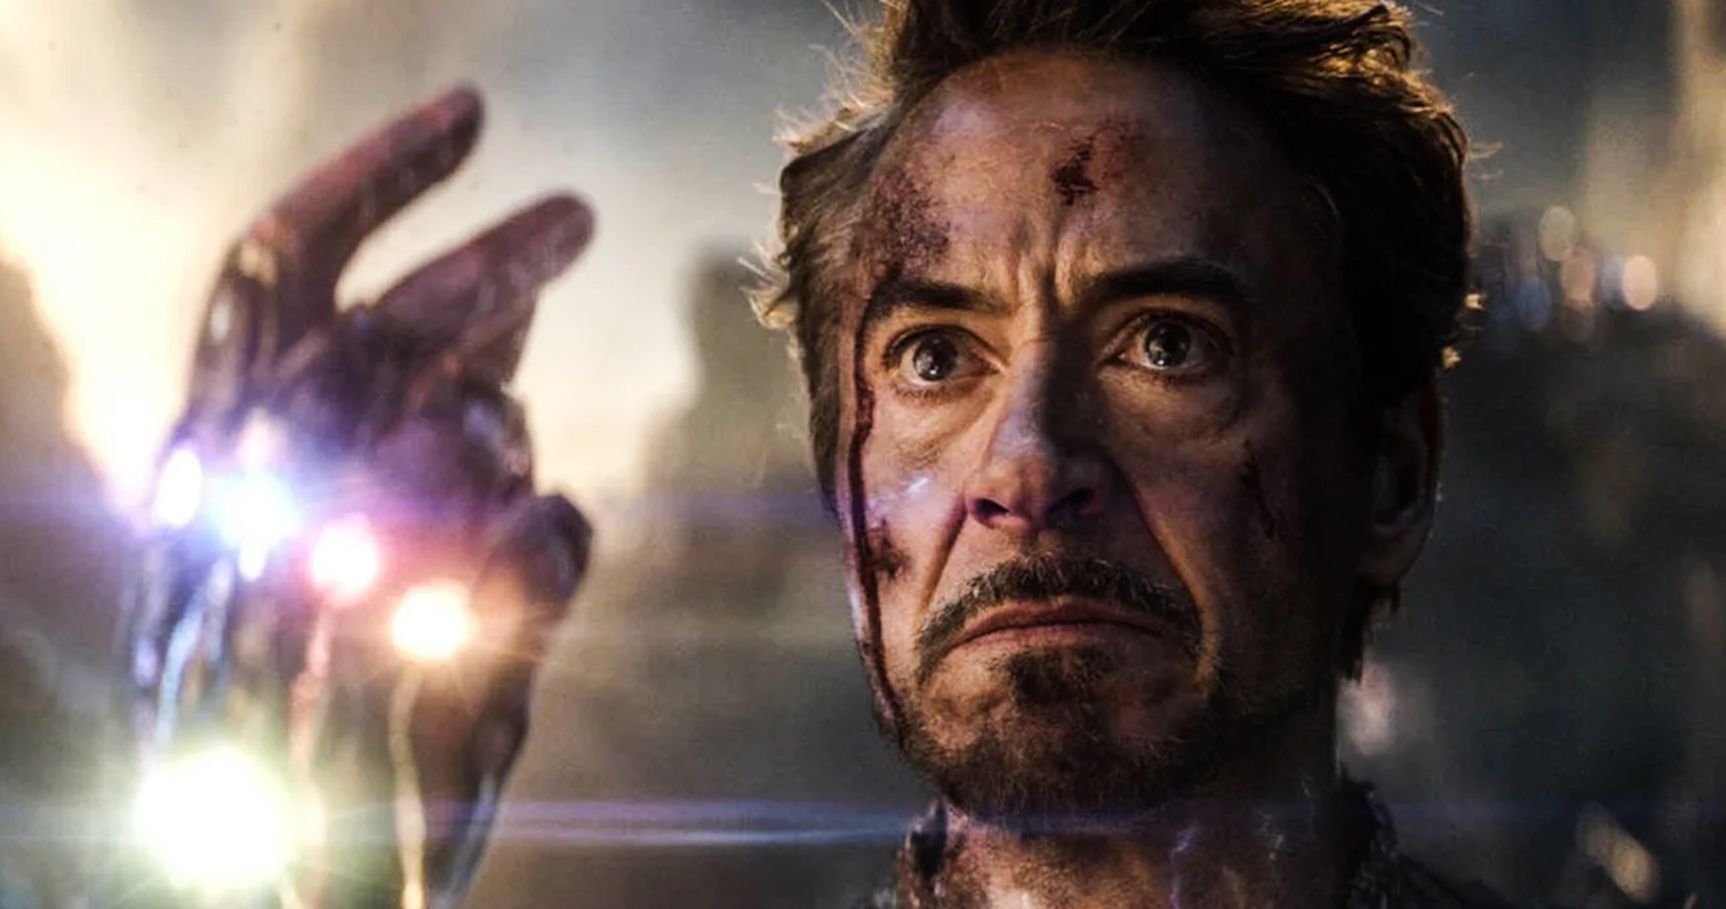 Robert Downey Jr. Teases His Post-MCU Plans: I Have Big and Fun Things Coming Up